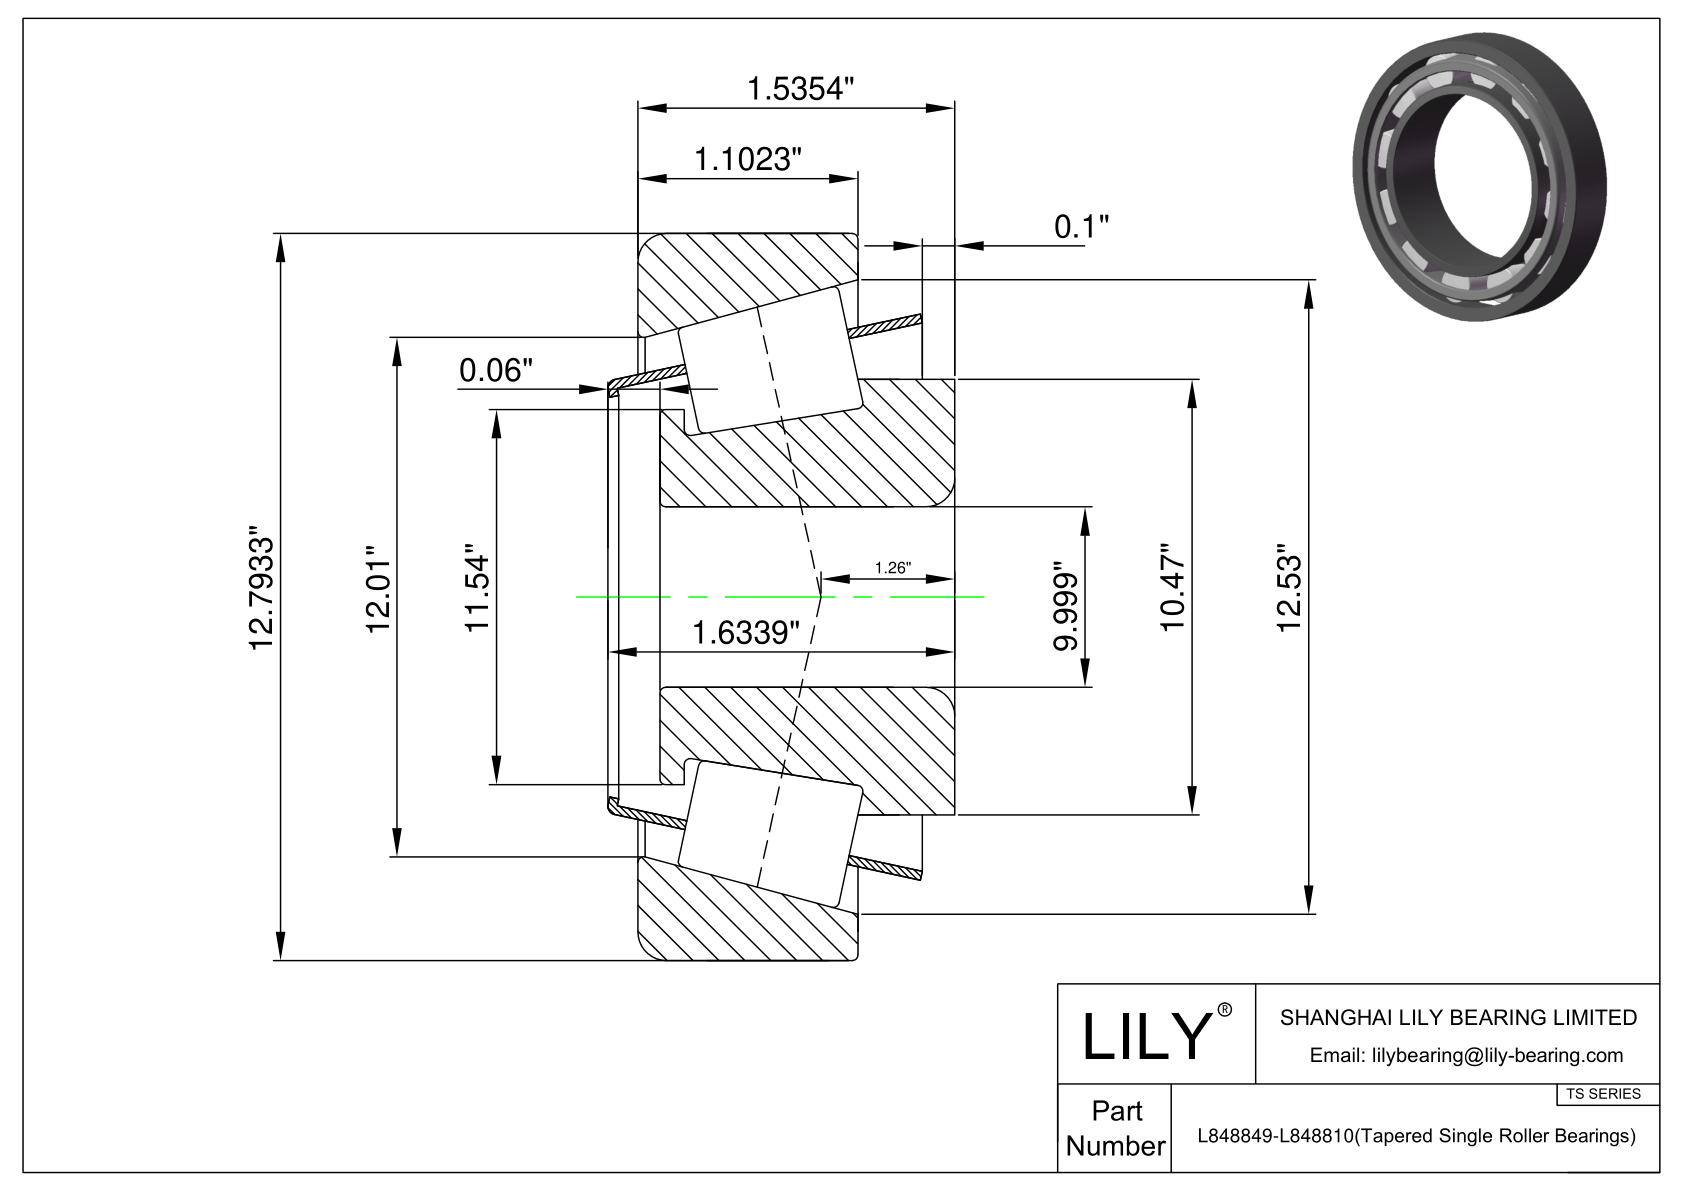 L848849-L848810 TS (Tapered Single Roller Bearings) (Imperial) cad drawing